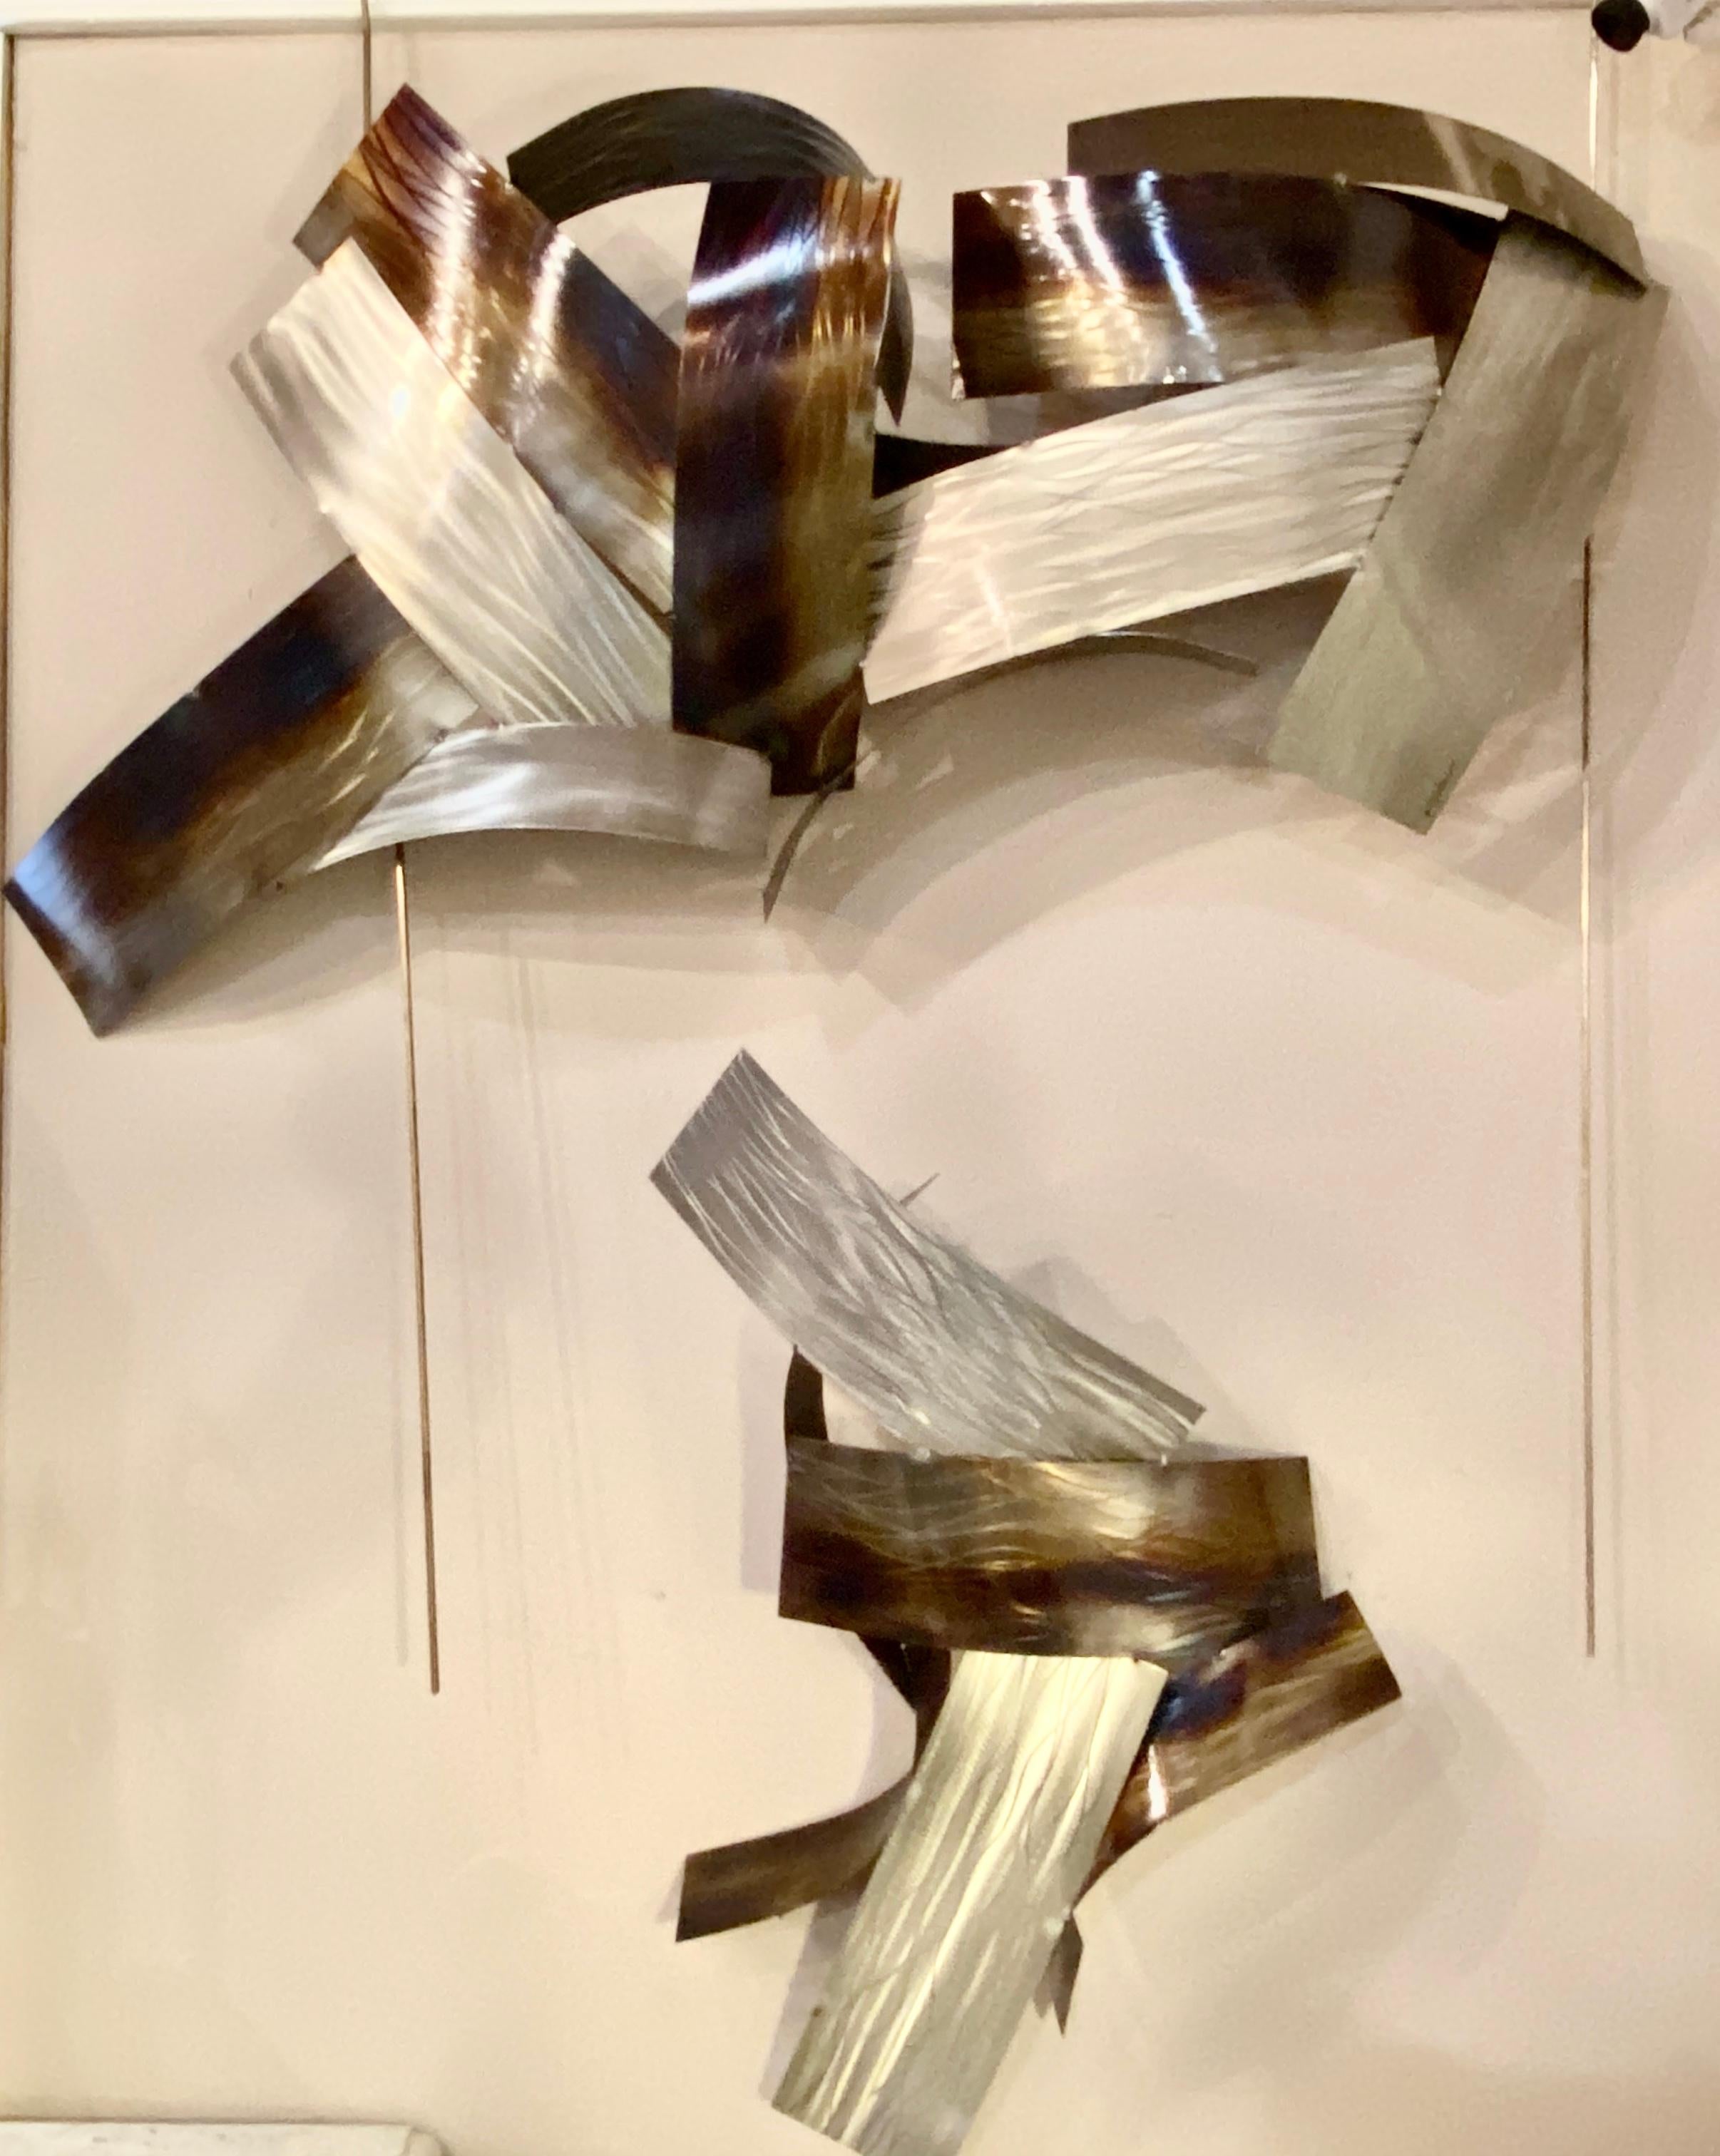 Two piece modern metal wall sculpture by Johnston 2011
The large piece measures 44 inches width, 22 high, 7 depth. The smaller measures 30 inches height, 19.5 width, 7 depth.